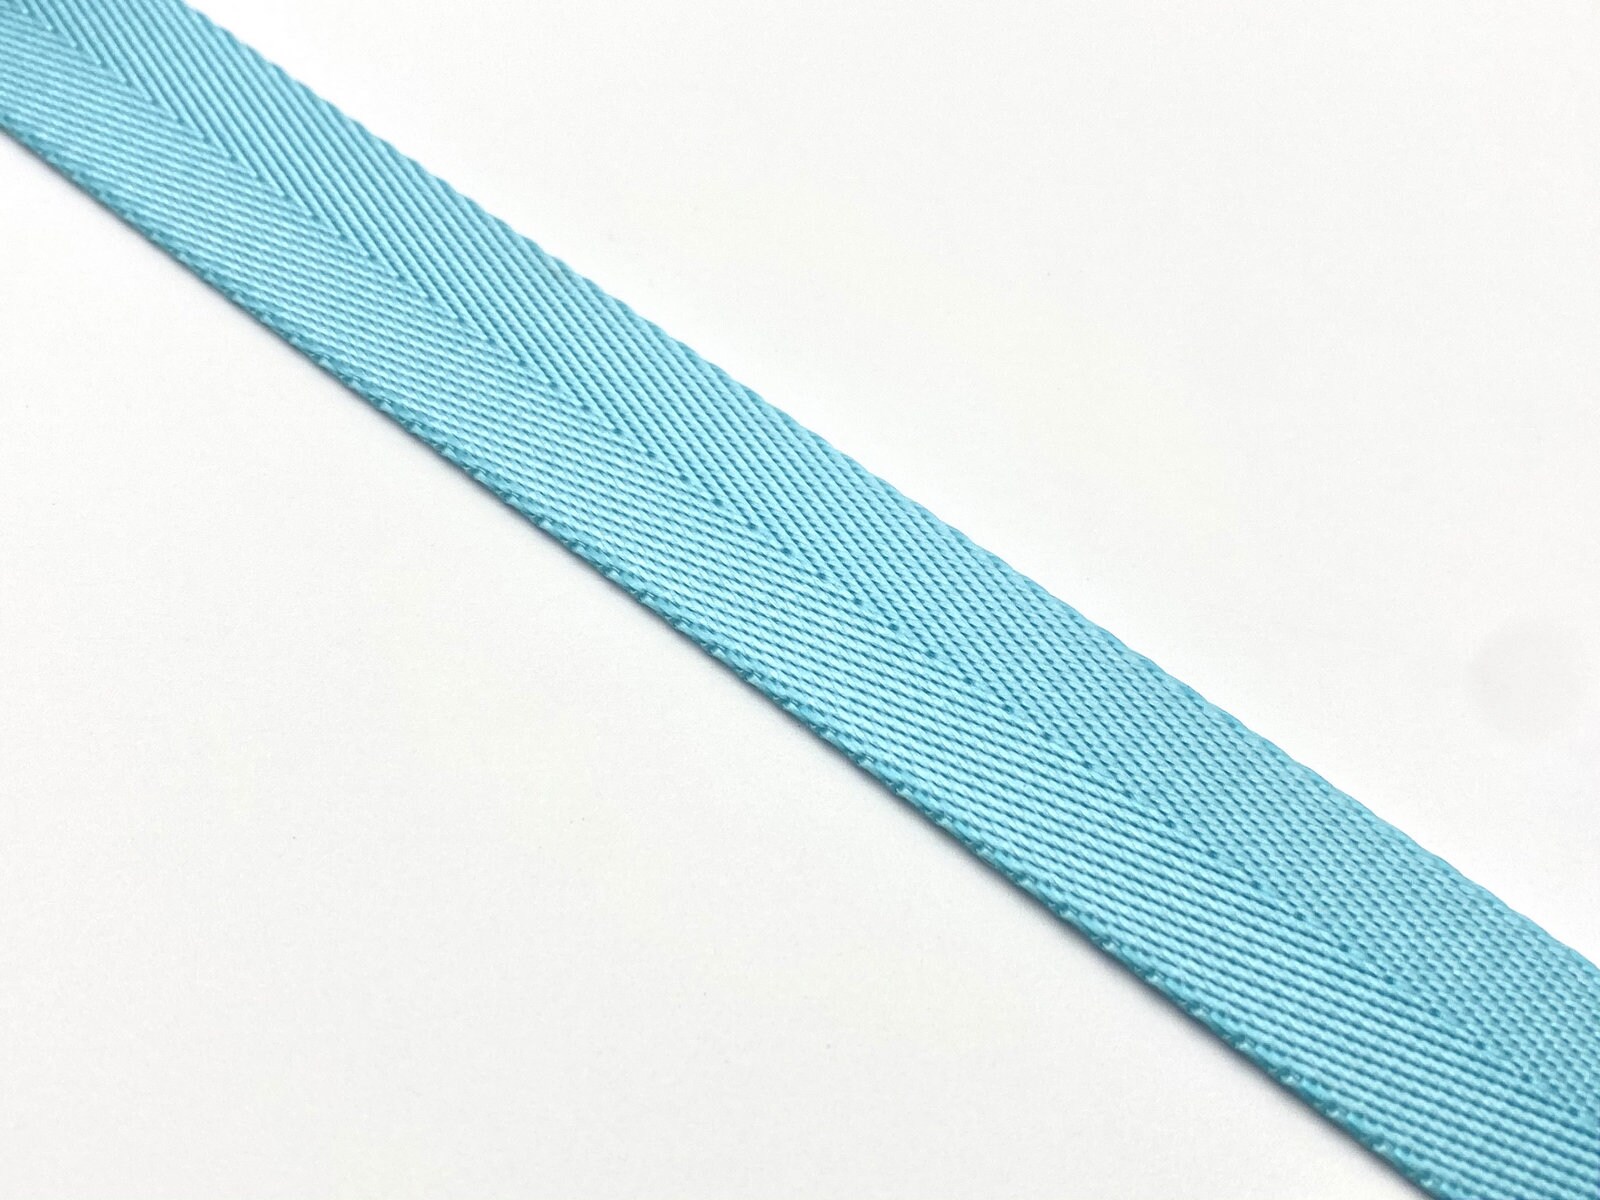 Striped Webbing Nylon Webbing 1 Inch Sky Blue Straps for Arts and